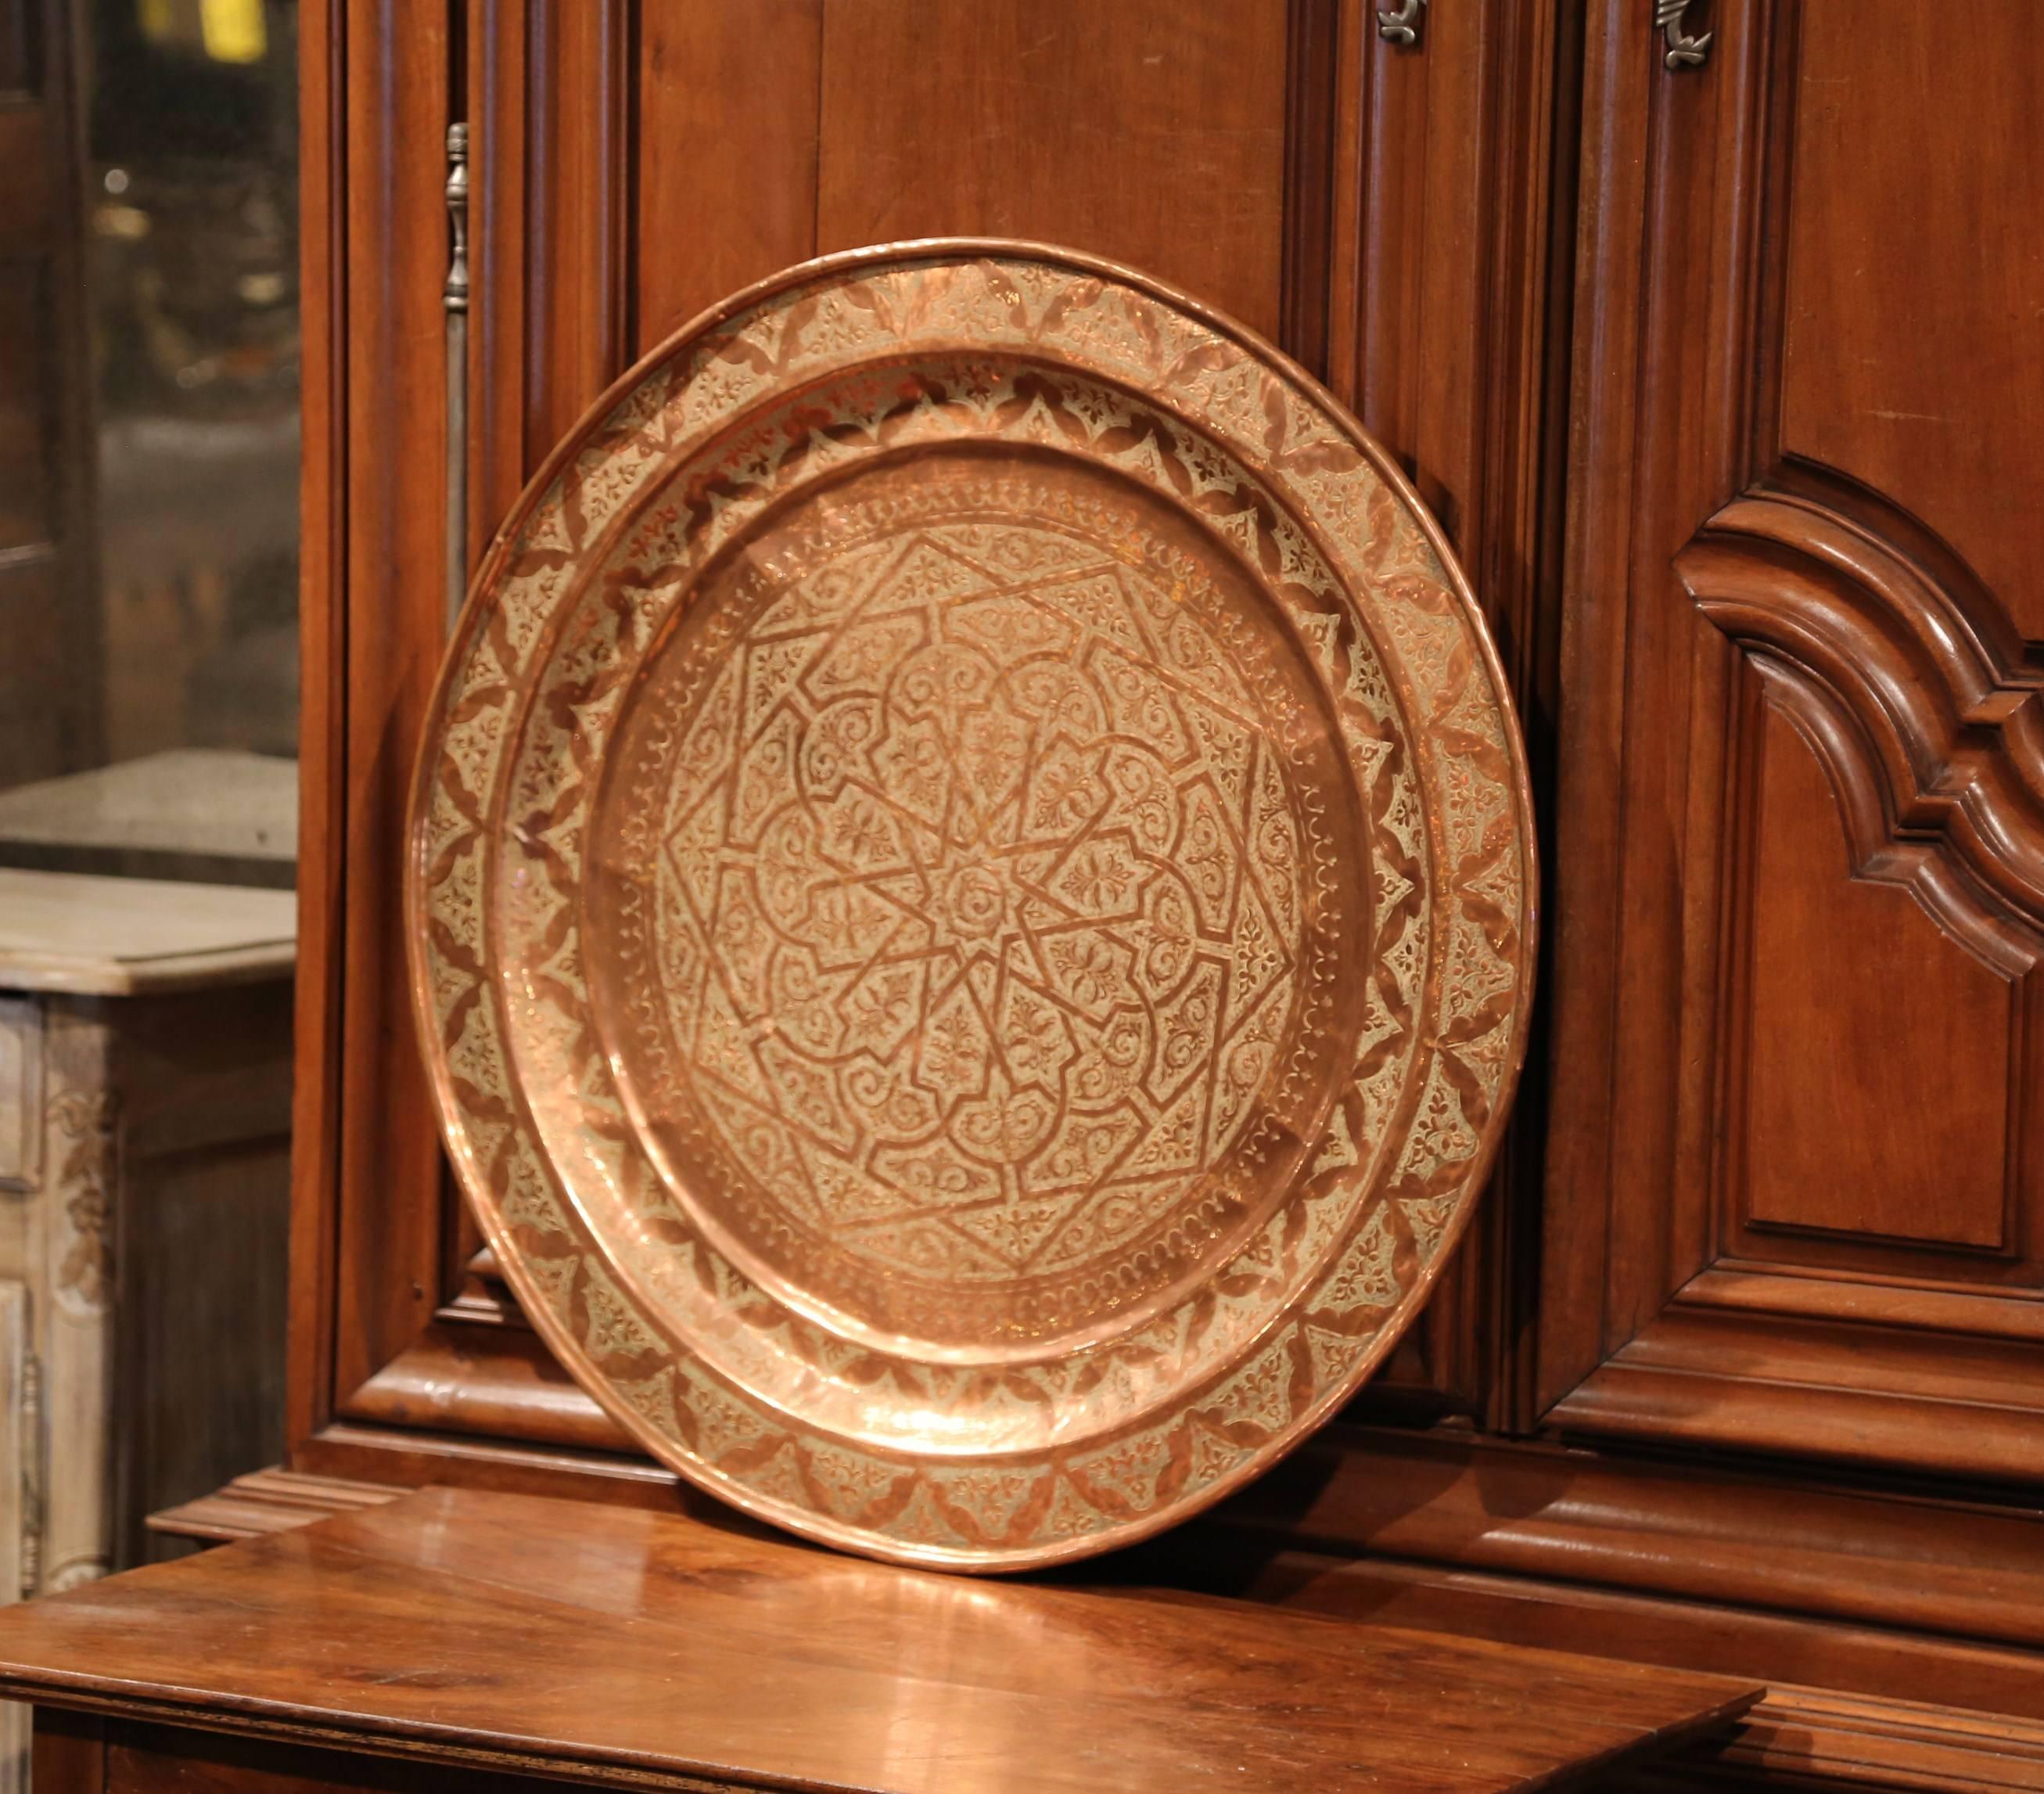 This large, turn of the century tray was crafted in France, circa 1920. The round tray has engraved, geometric motifs with a star in the centre. The tray is surrounded by a raised edge with a looped treatment and has a back hook for easy hanging.